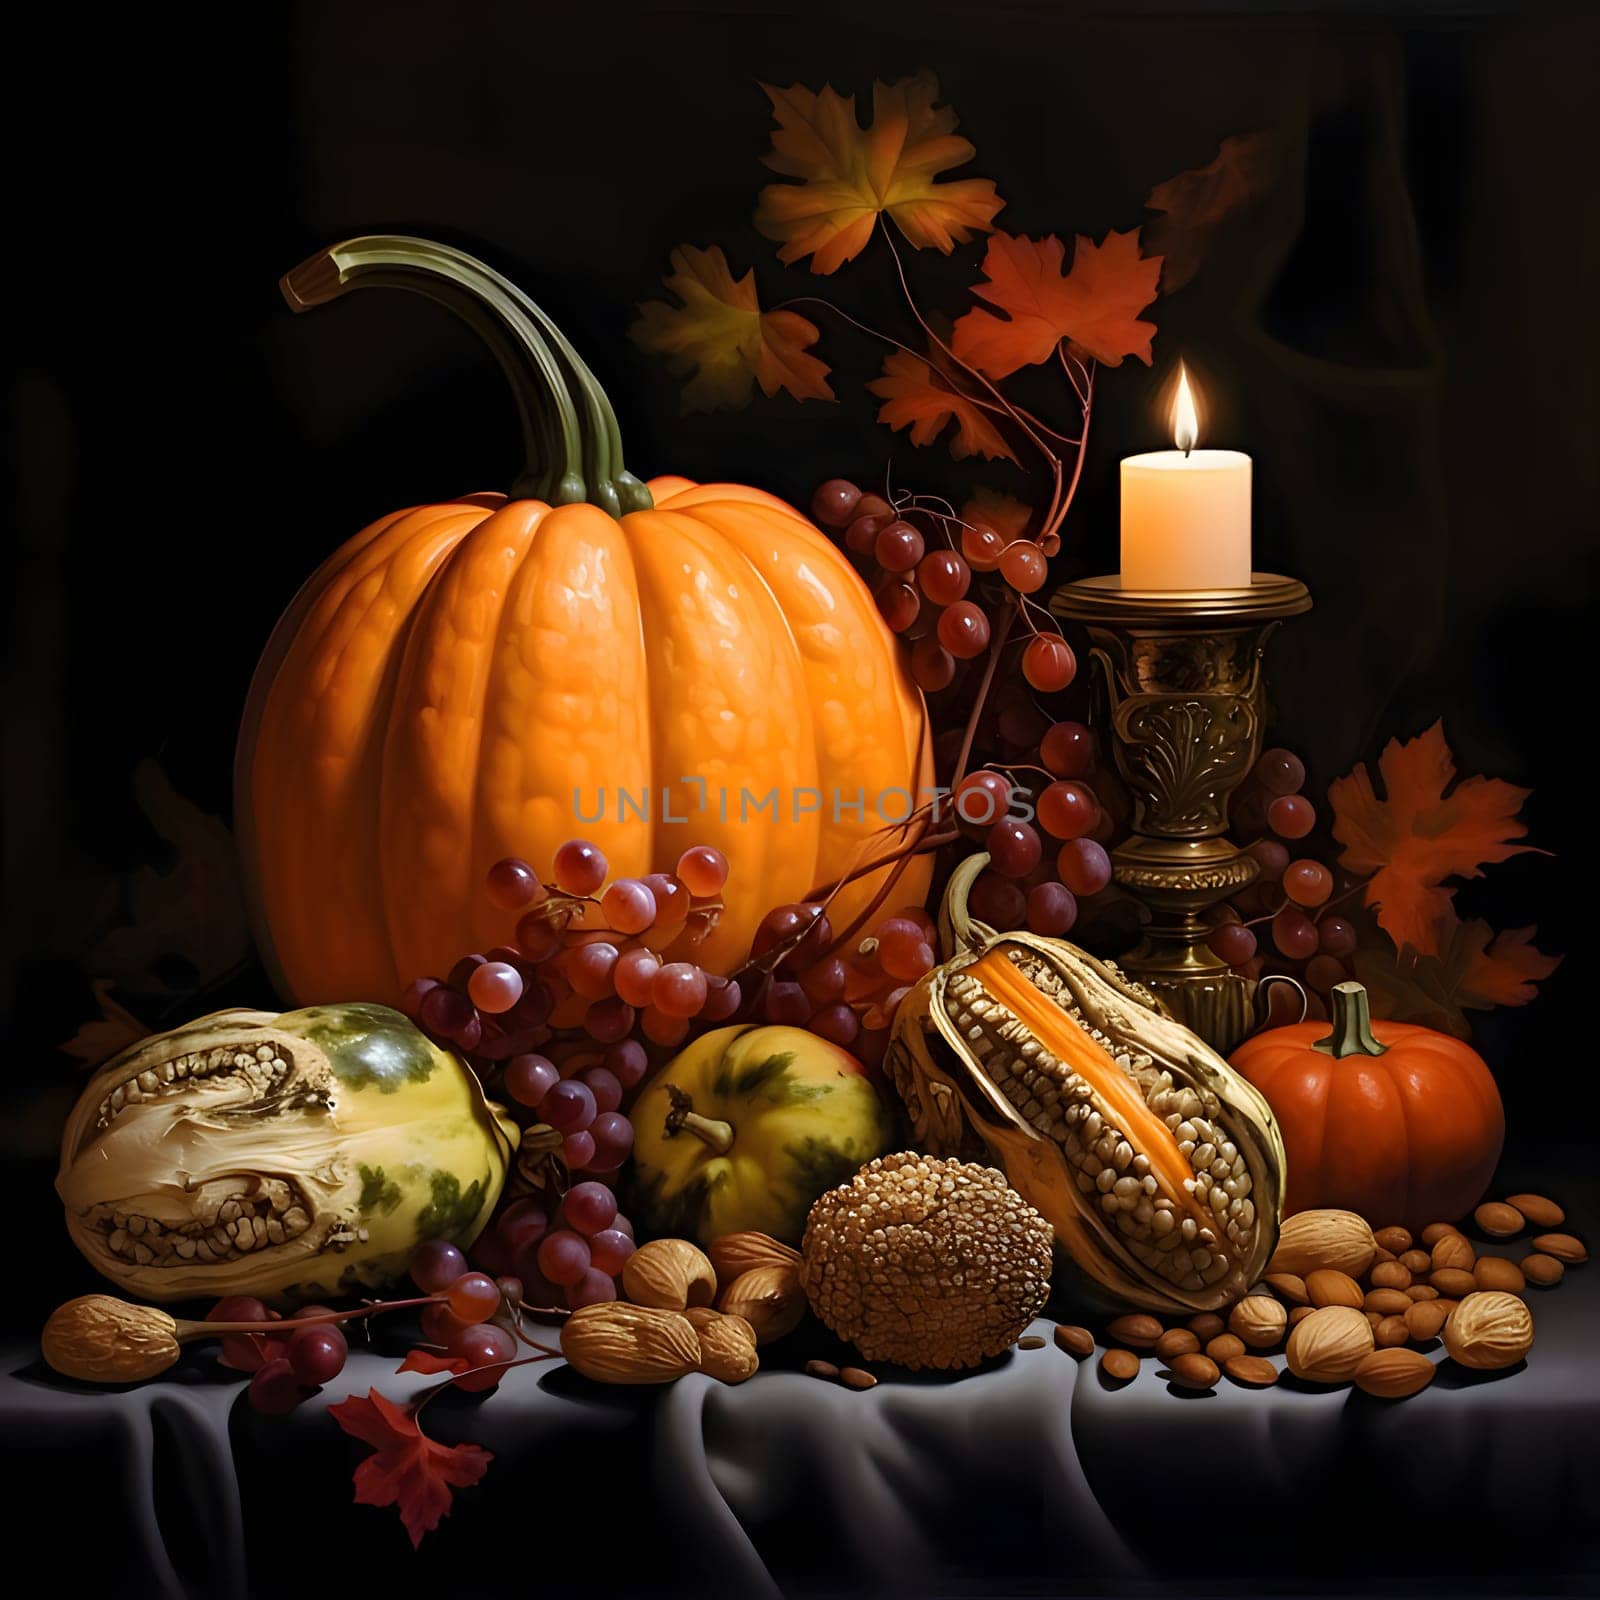 On the table the harvest from the field; pumpkins, tomatoes, grapes, nuts leaves and a burning candle. Pumpkin as a dish of thanksgiving for the harvest. by ThemesS